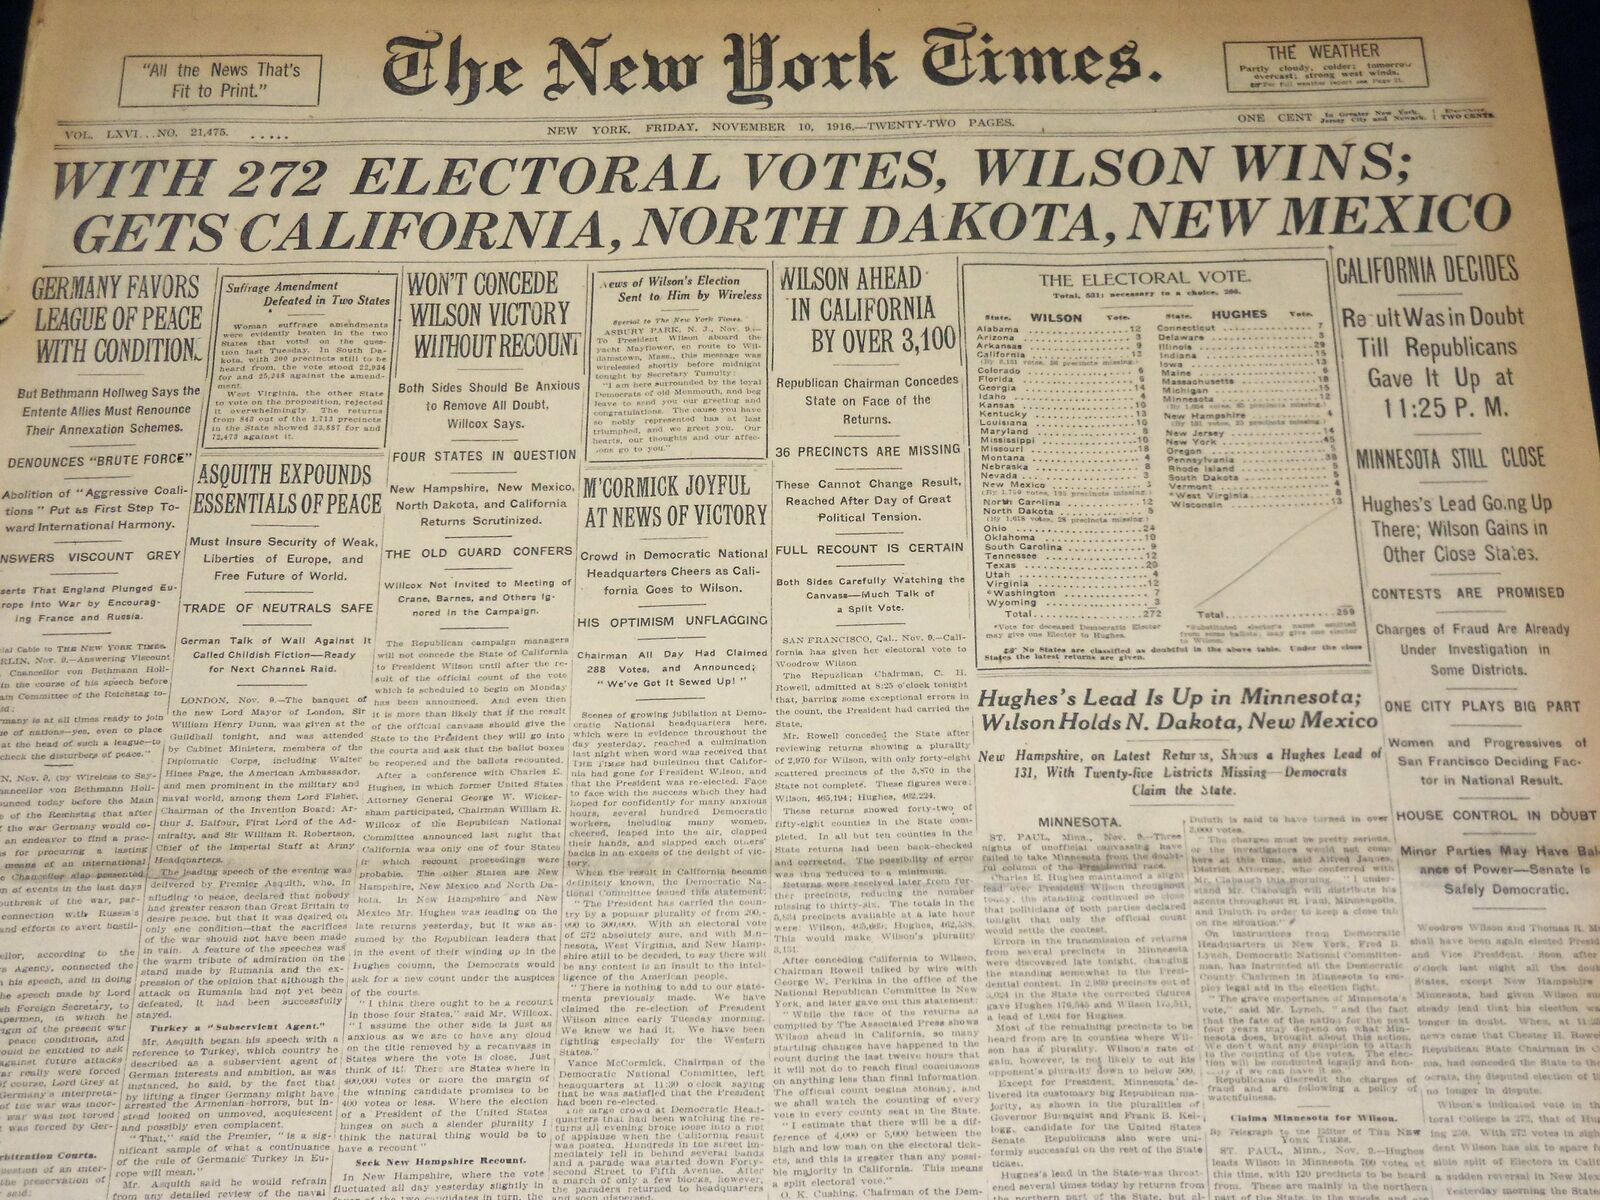 1916 NOVEMBER 10 NEW YORK TIMES - WITH 272 ELECTORAL VOTES WILSON WINS - NT 7689